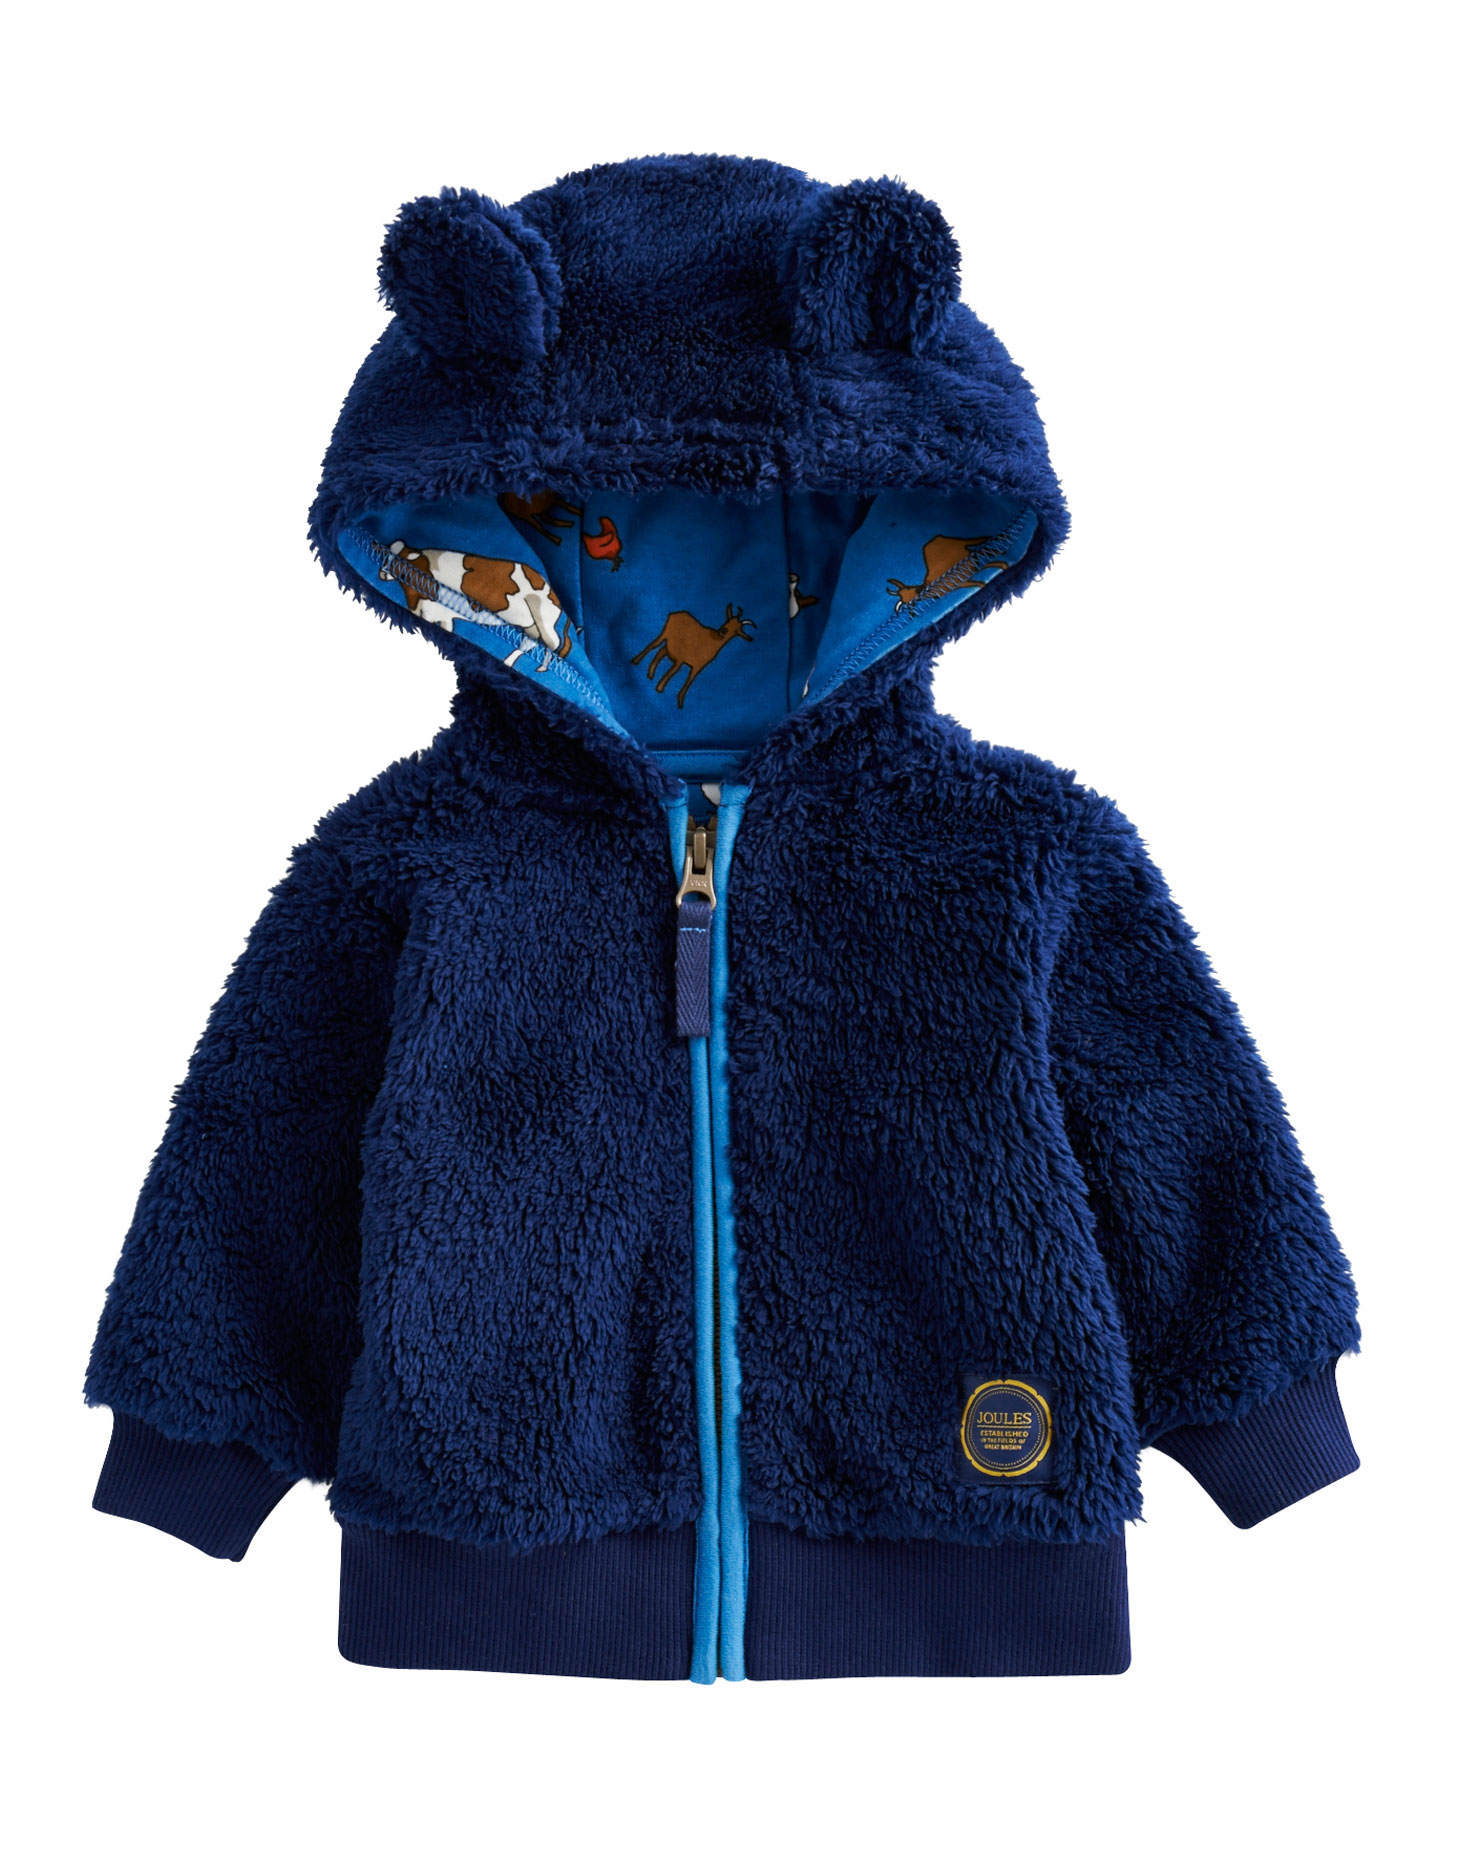 Best of Joules Kids AW13 - StyleNest